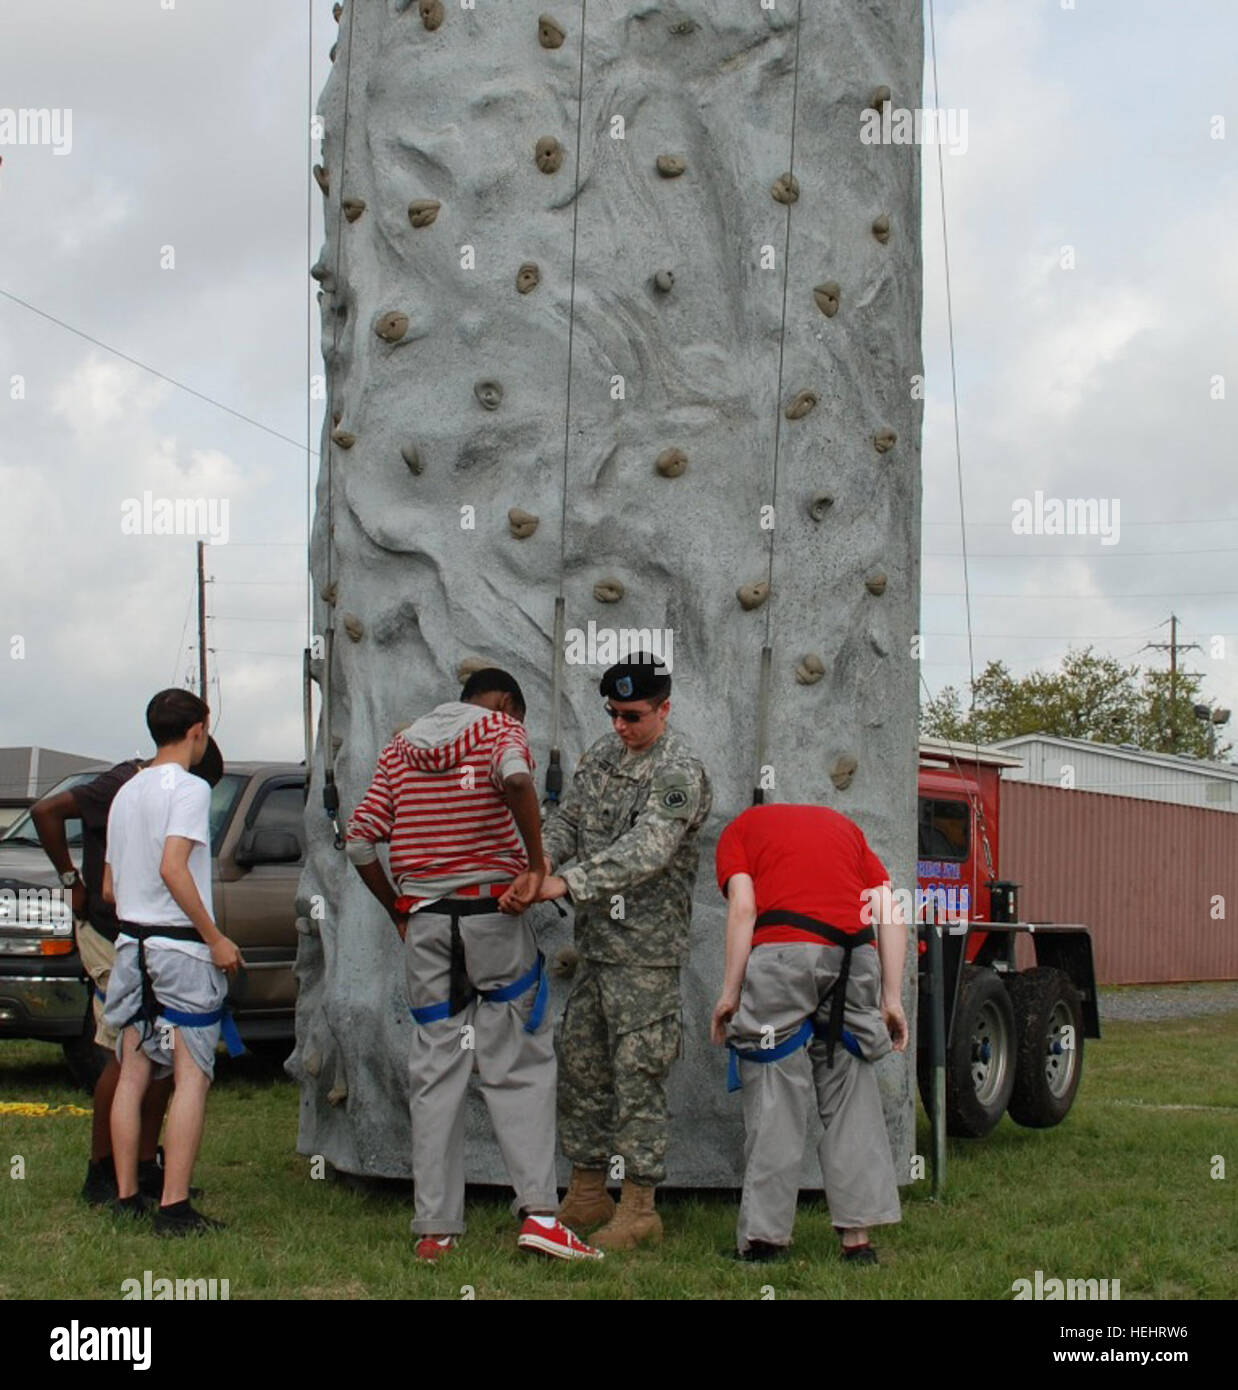 Louisiana Army National Guardsmen Sgt. Lex B. Putnam of New Orleans, helps cadets of the West Jefferson High School Air Force Junior Reserve Officers Training Corps team gear up before climbing a rock wall during a Military Day picnic in Harvey, La., March 13. The students were given the opportunity to interact with Soldiers, while receiving hands-on experience with equipment, which included a howitzer, a boat display and a Blackhawk helicopter. National Guard rewards local JROTC cadets with fun, relaxation 159374 Stock Photo